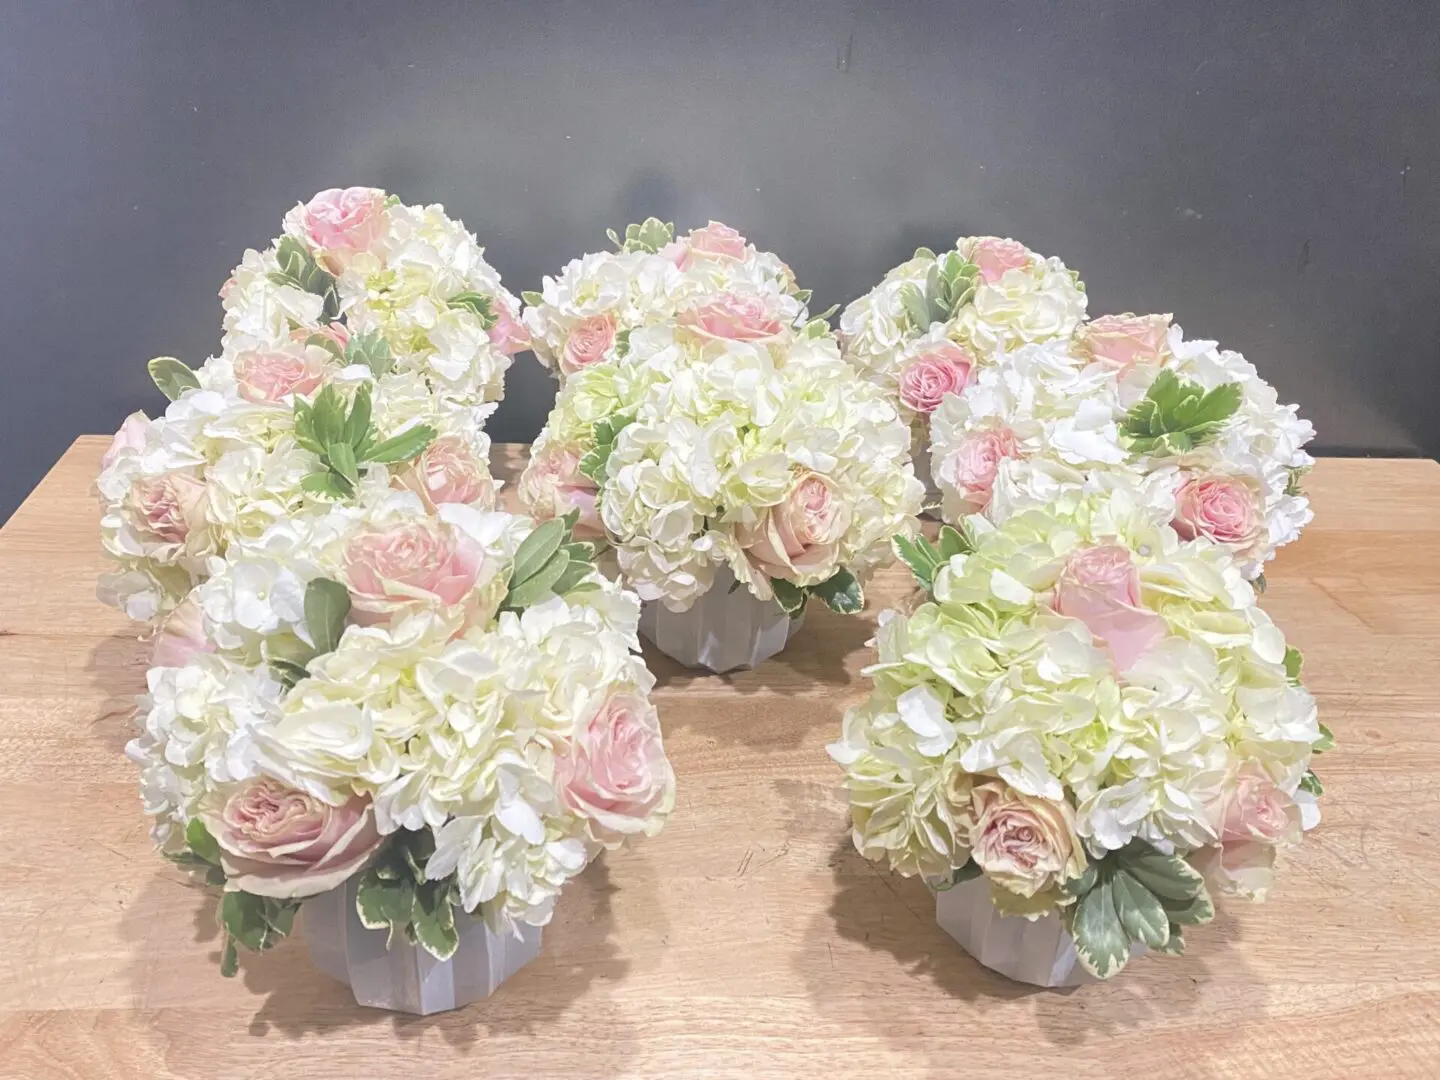 Bouquets of white and pink roses